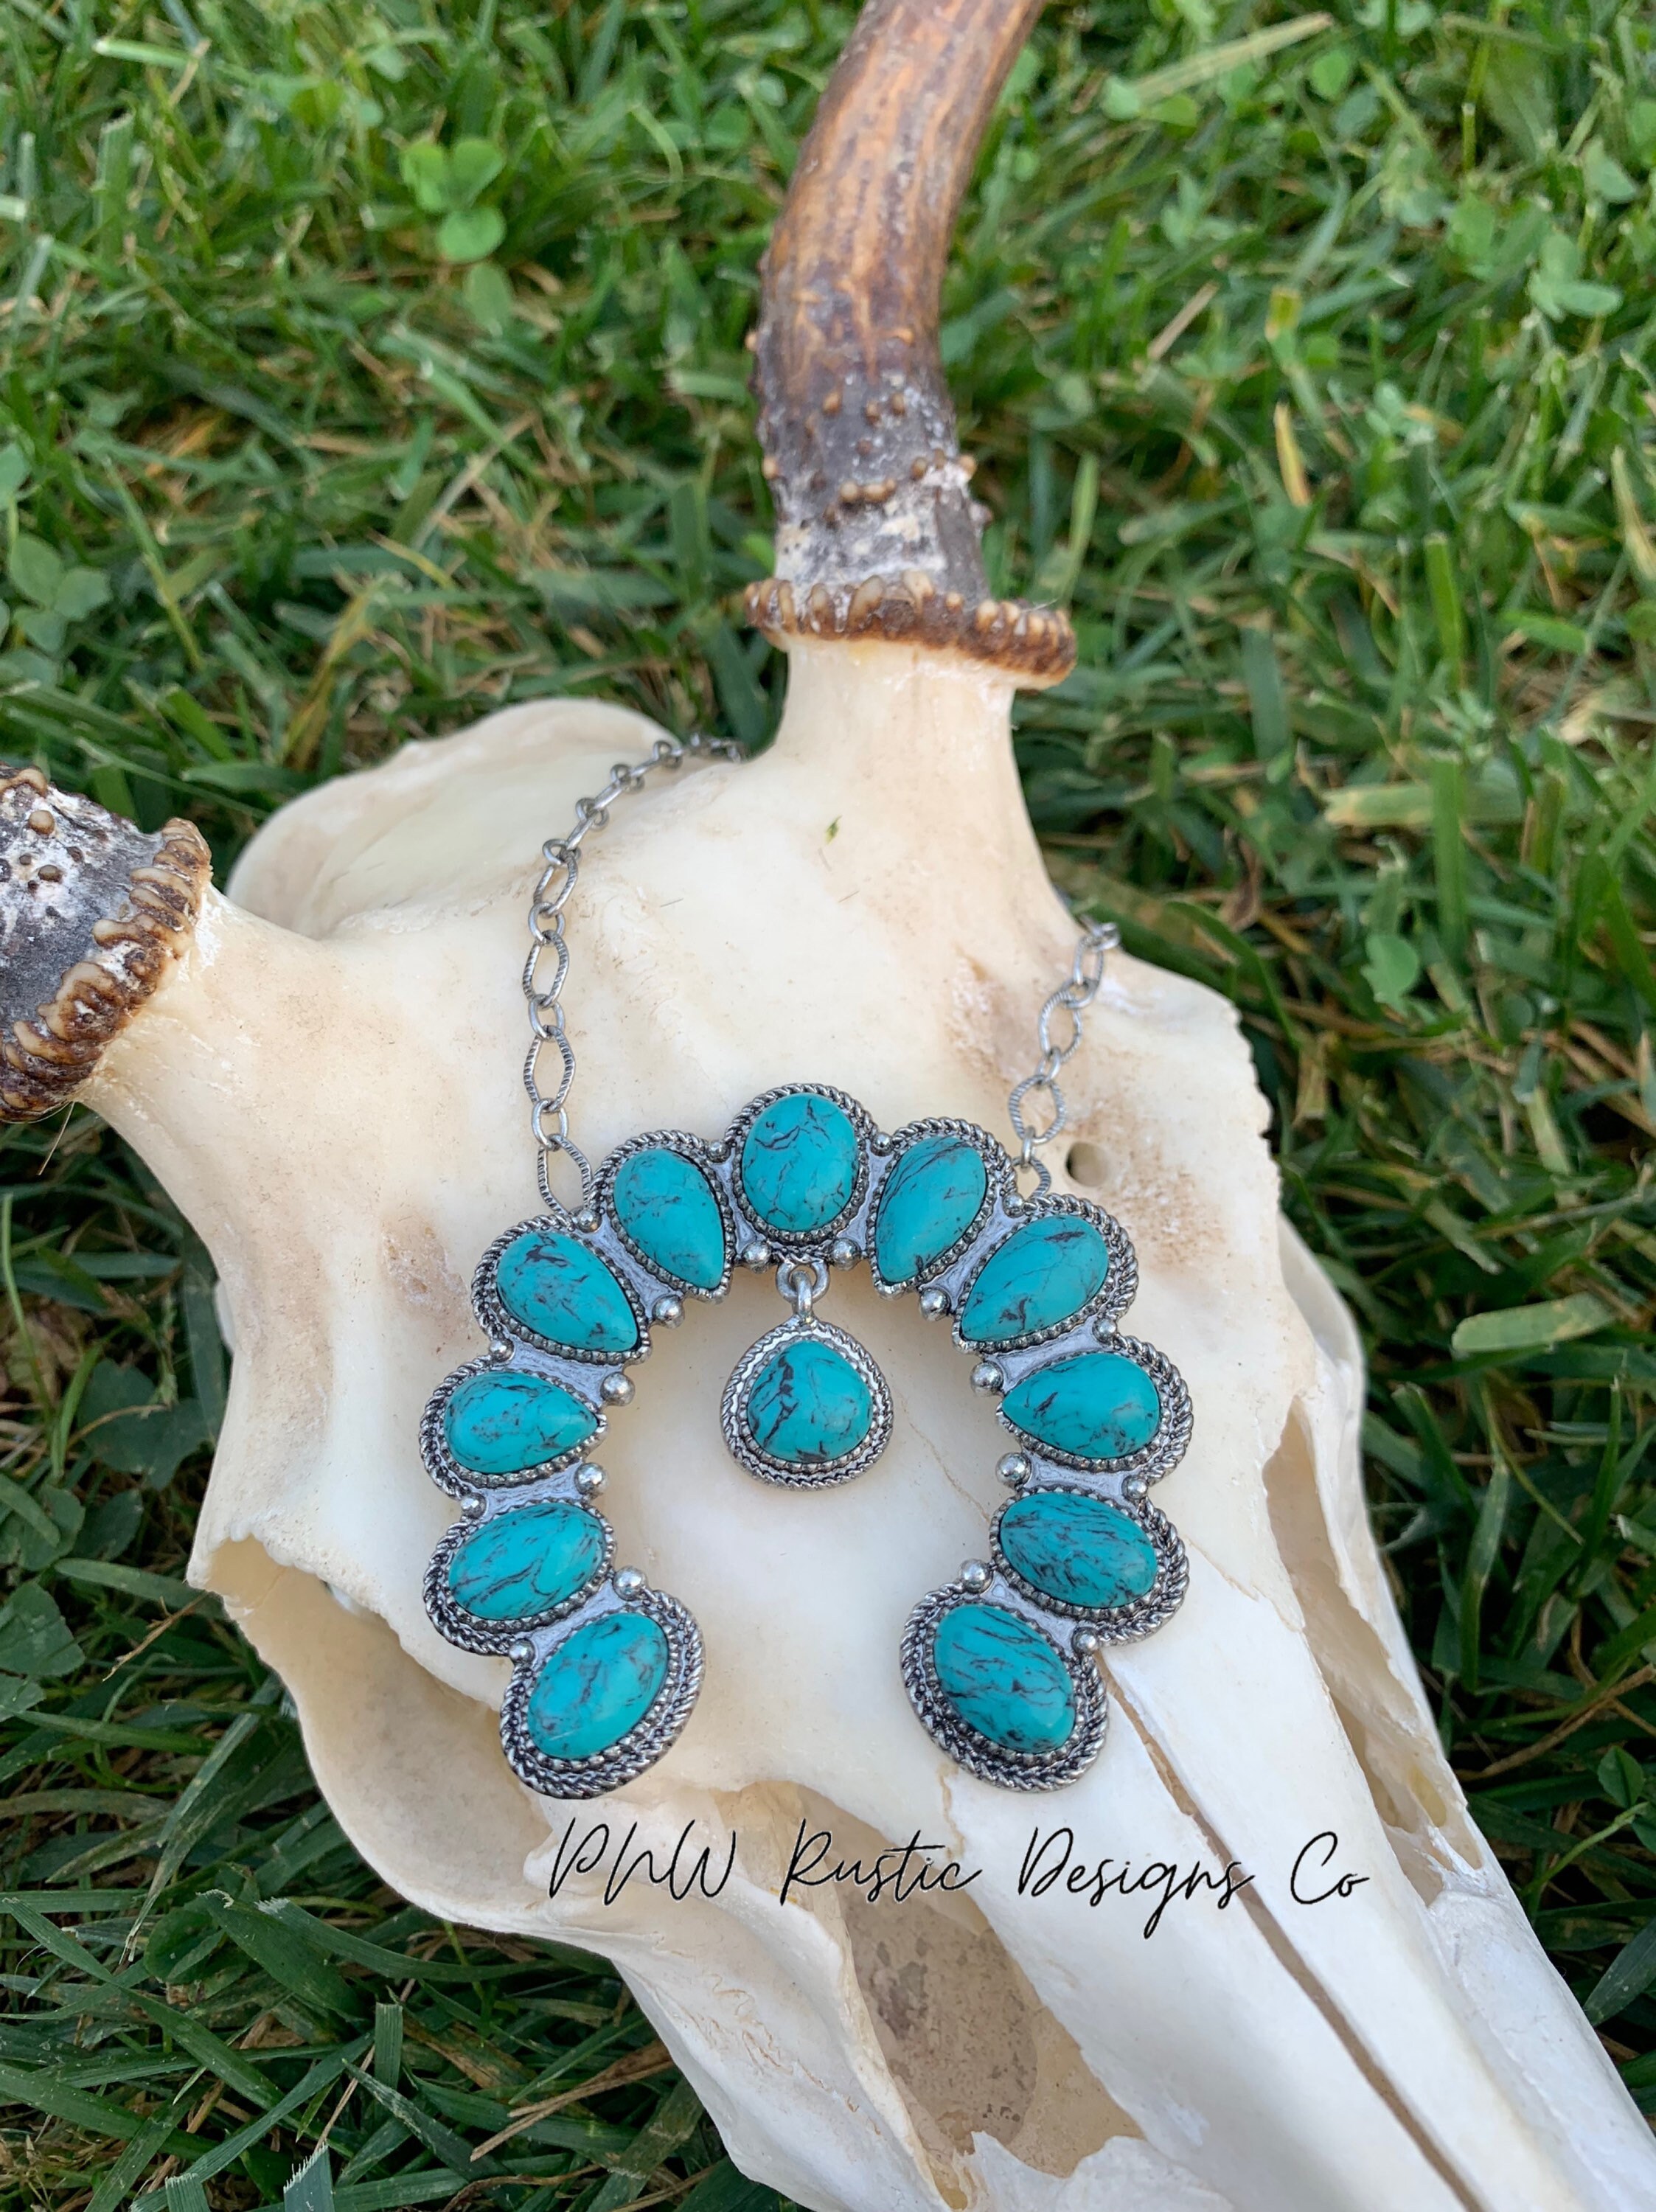 DISCONTINUED Western Jewelry Squash Blossom Necklace - Etsy